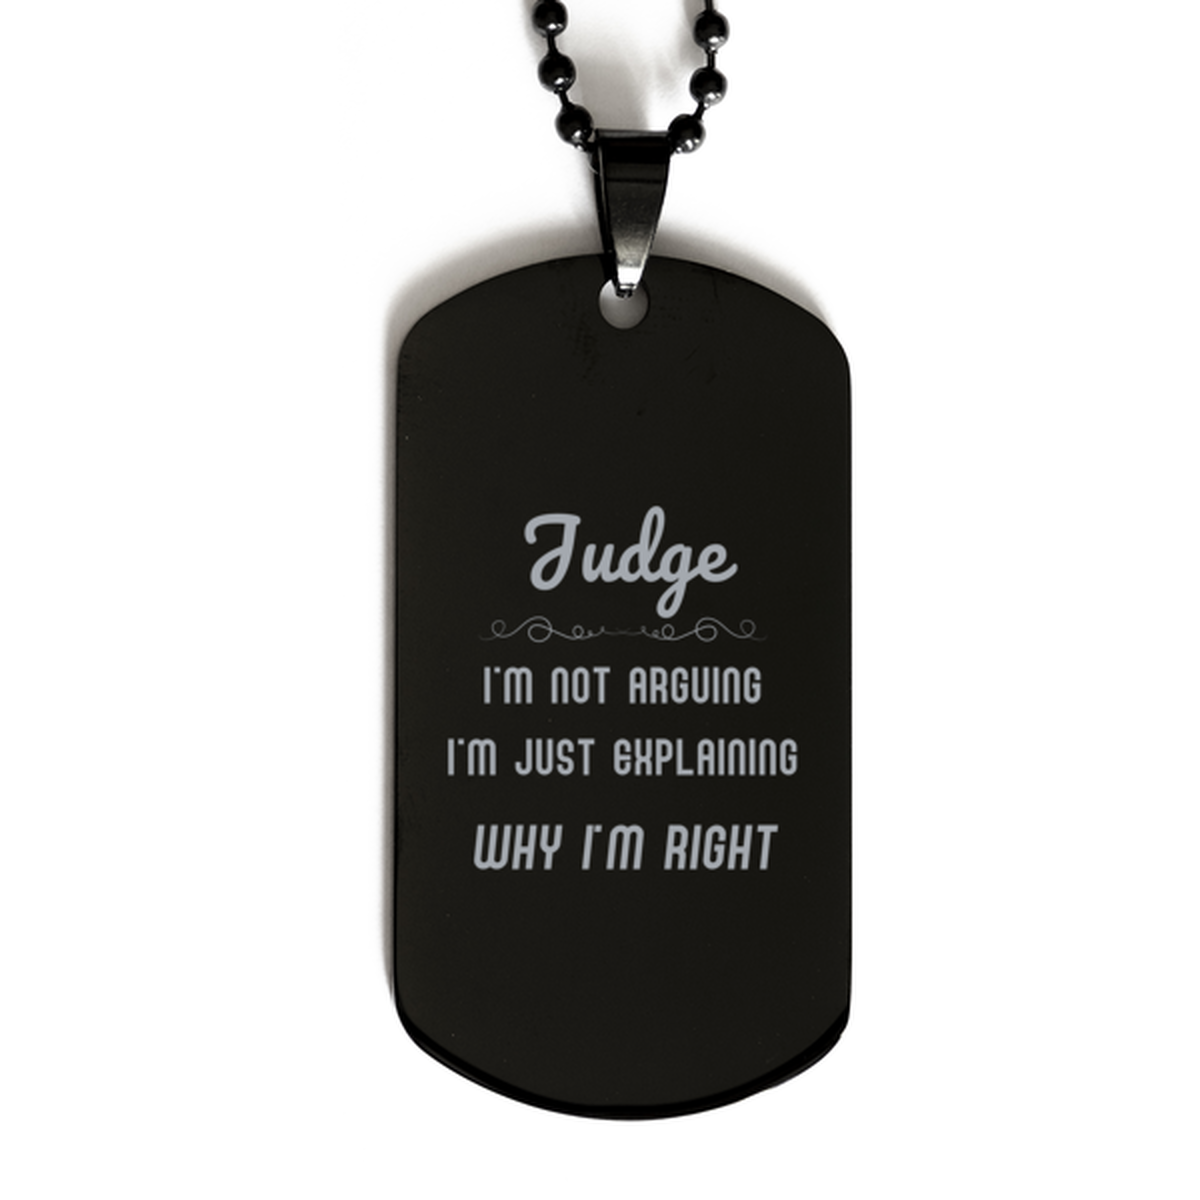 Judge I'm not Arguing. I'm Just Explaining Why I'm RIGHT Black Dog Tag, Funny Saying Quote Judge Gifts For Judge Graduation Birthday Christmas Gifts for Men Women Coworker